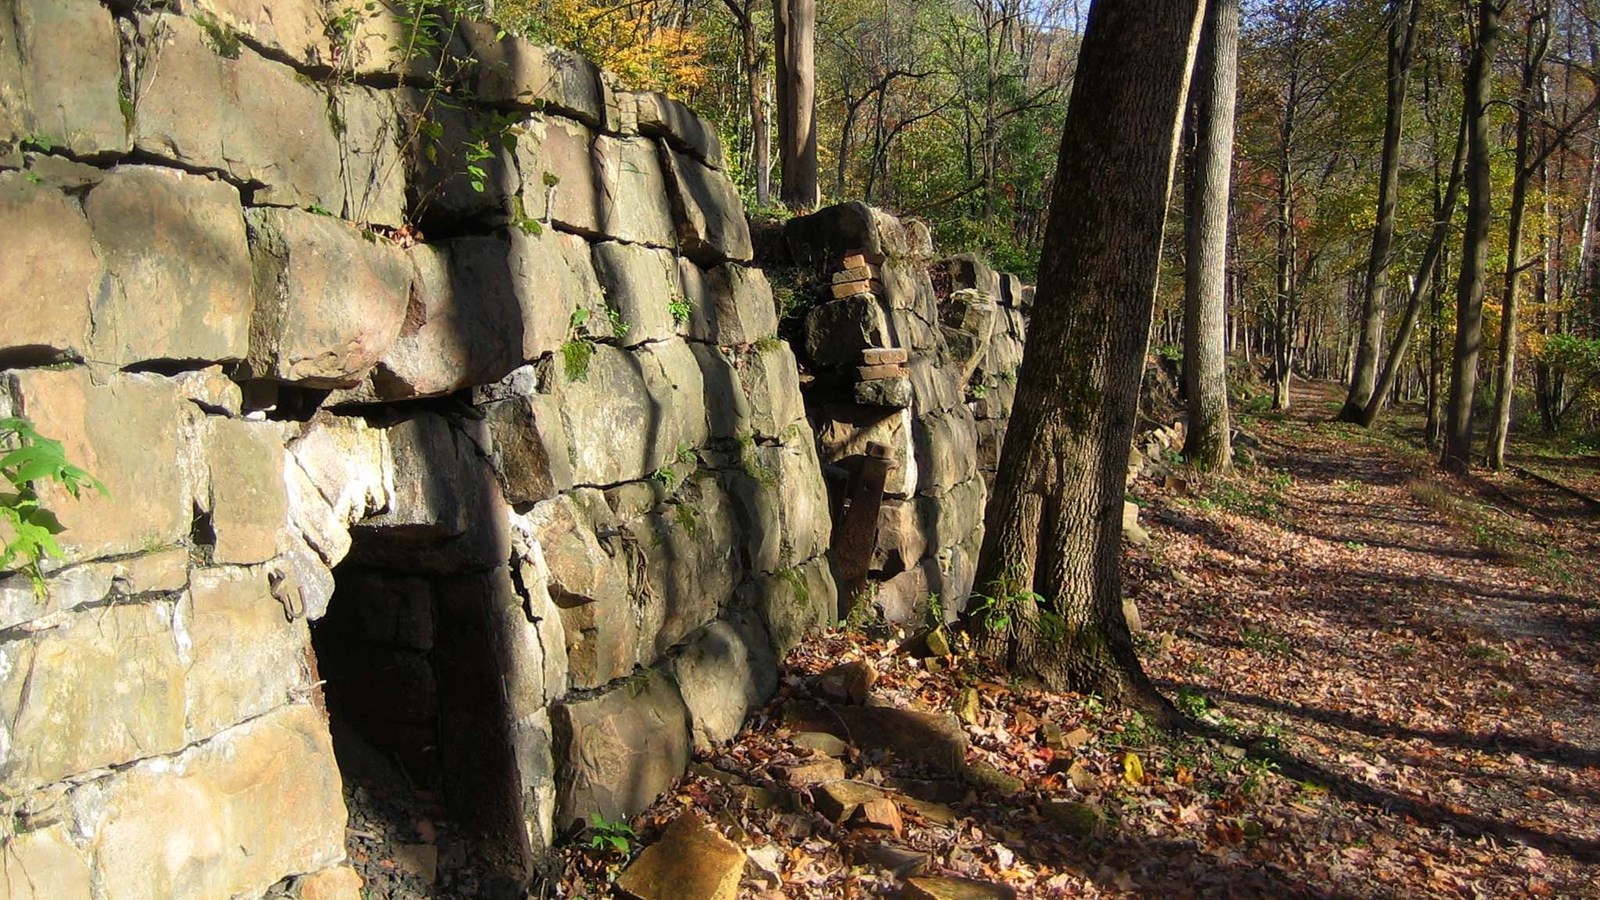 A view of the old coke ovens near to the trail